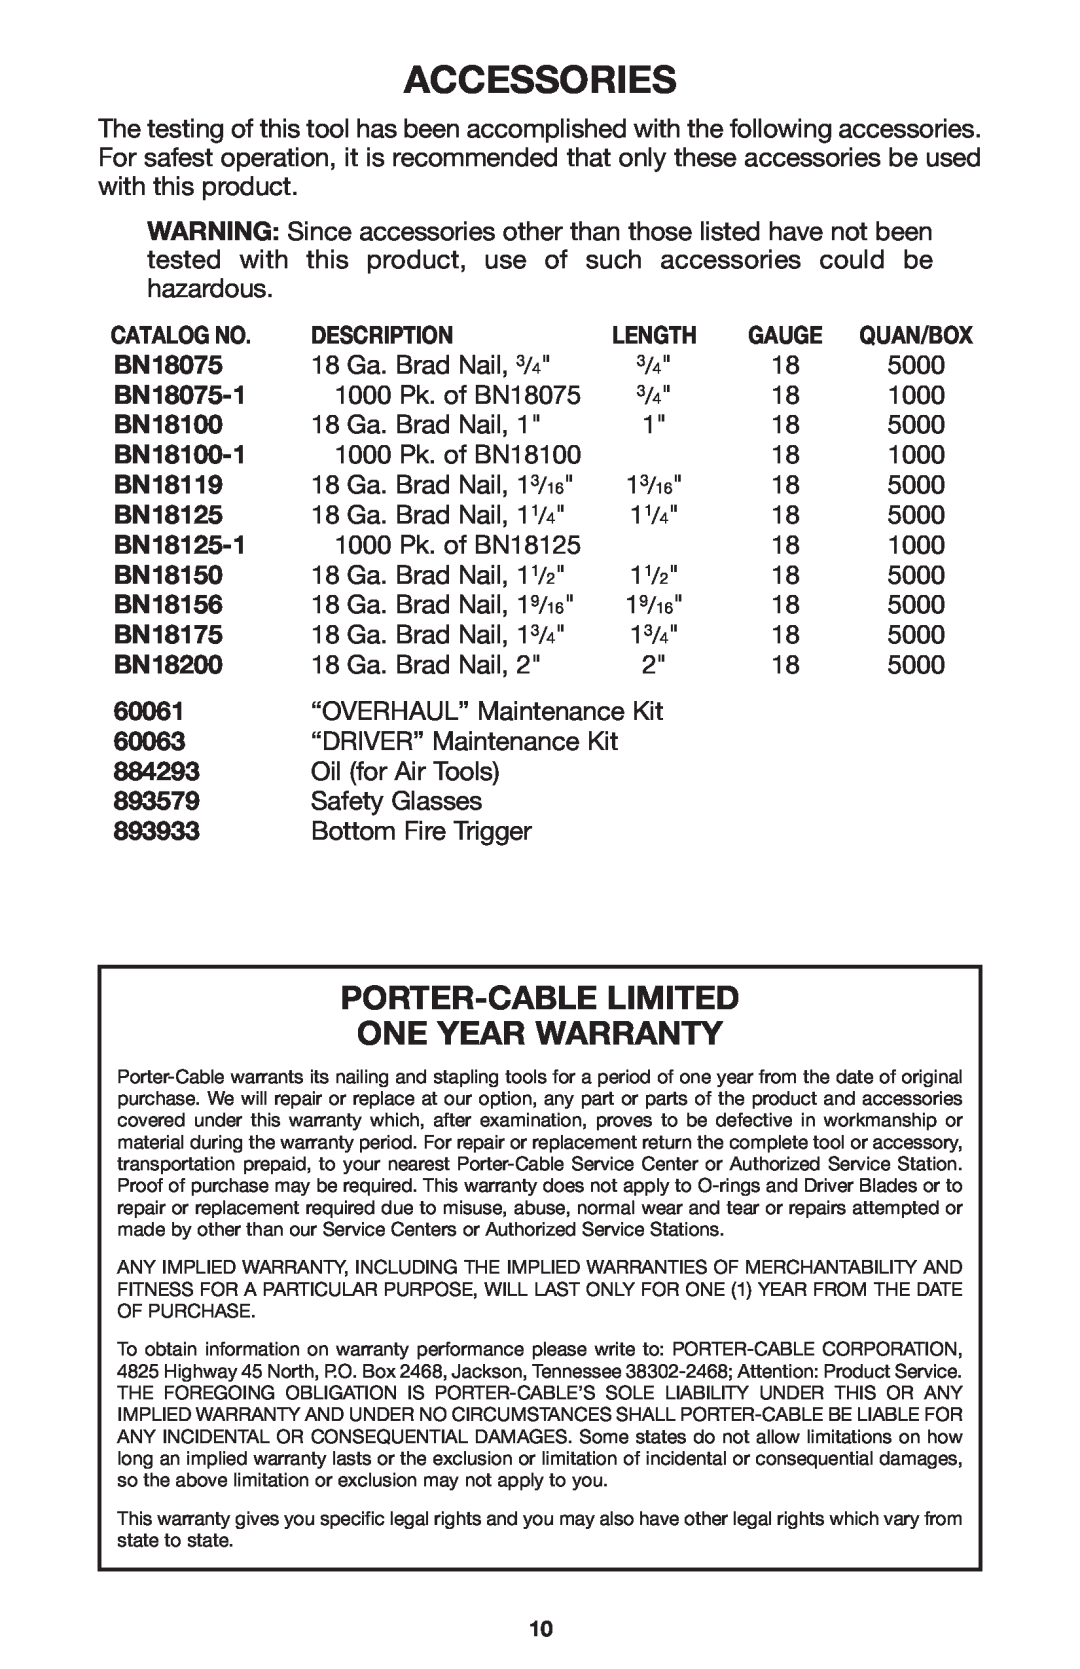 Porter-Cable 894884-003, BN200A instruction manual Accessories, Porter-Cable Limited One Year Warranty 